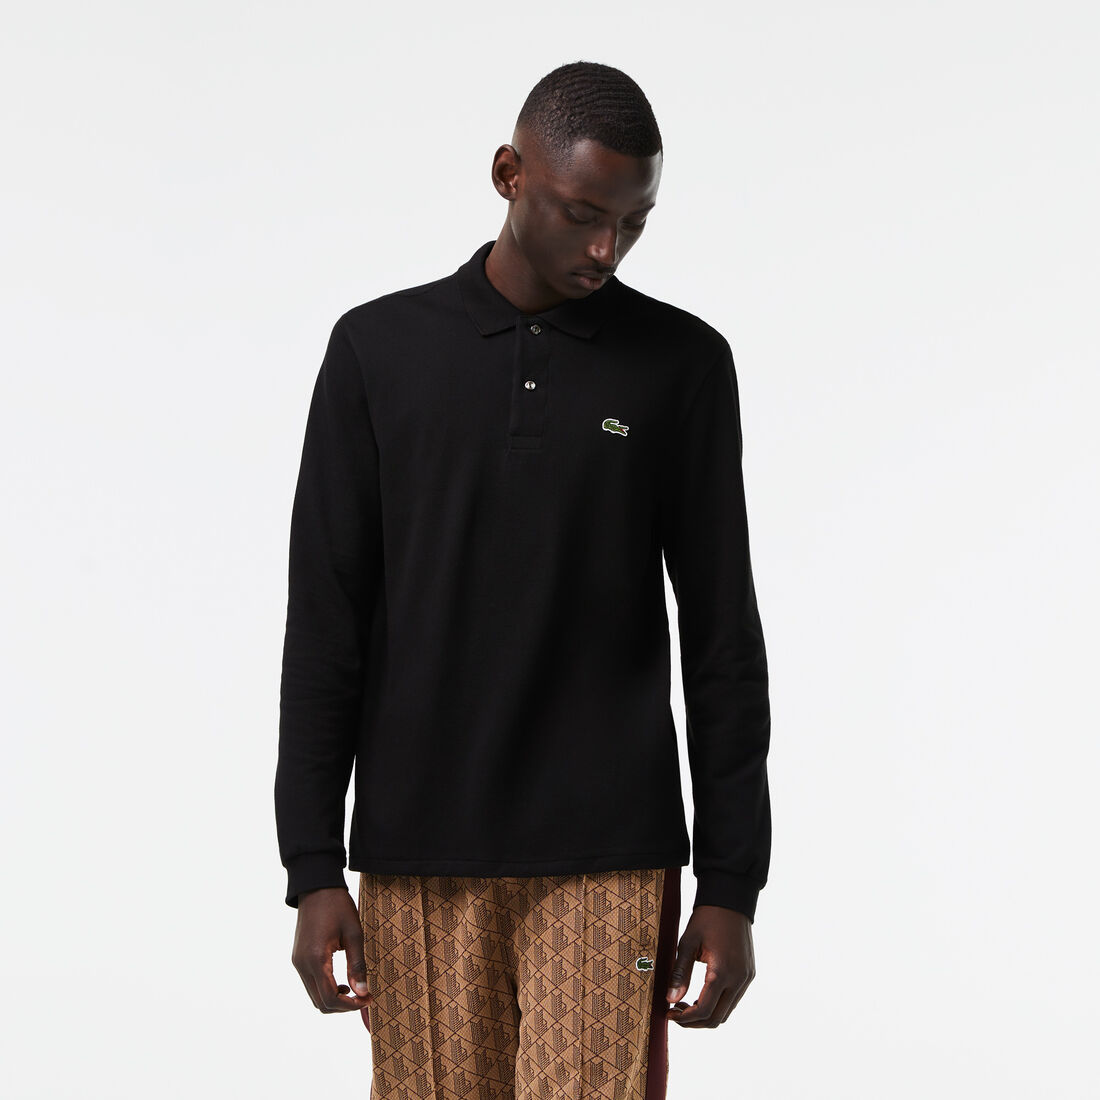 Lacoste Long-sleeve Classic Fit L.12.12 Men's Shirts Black | 641-XMGWDR